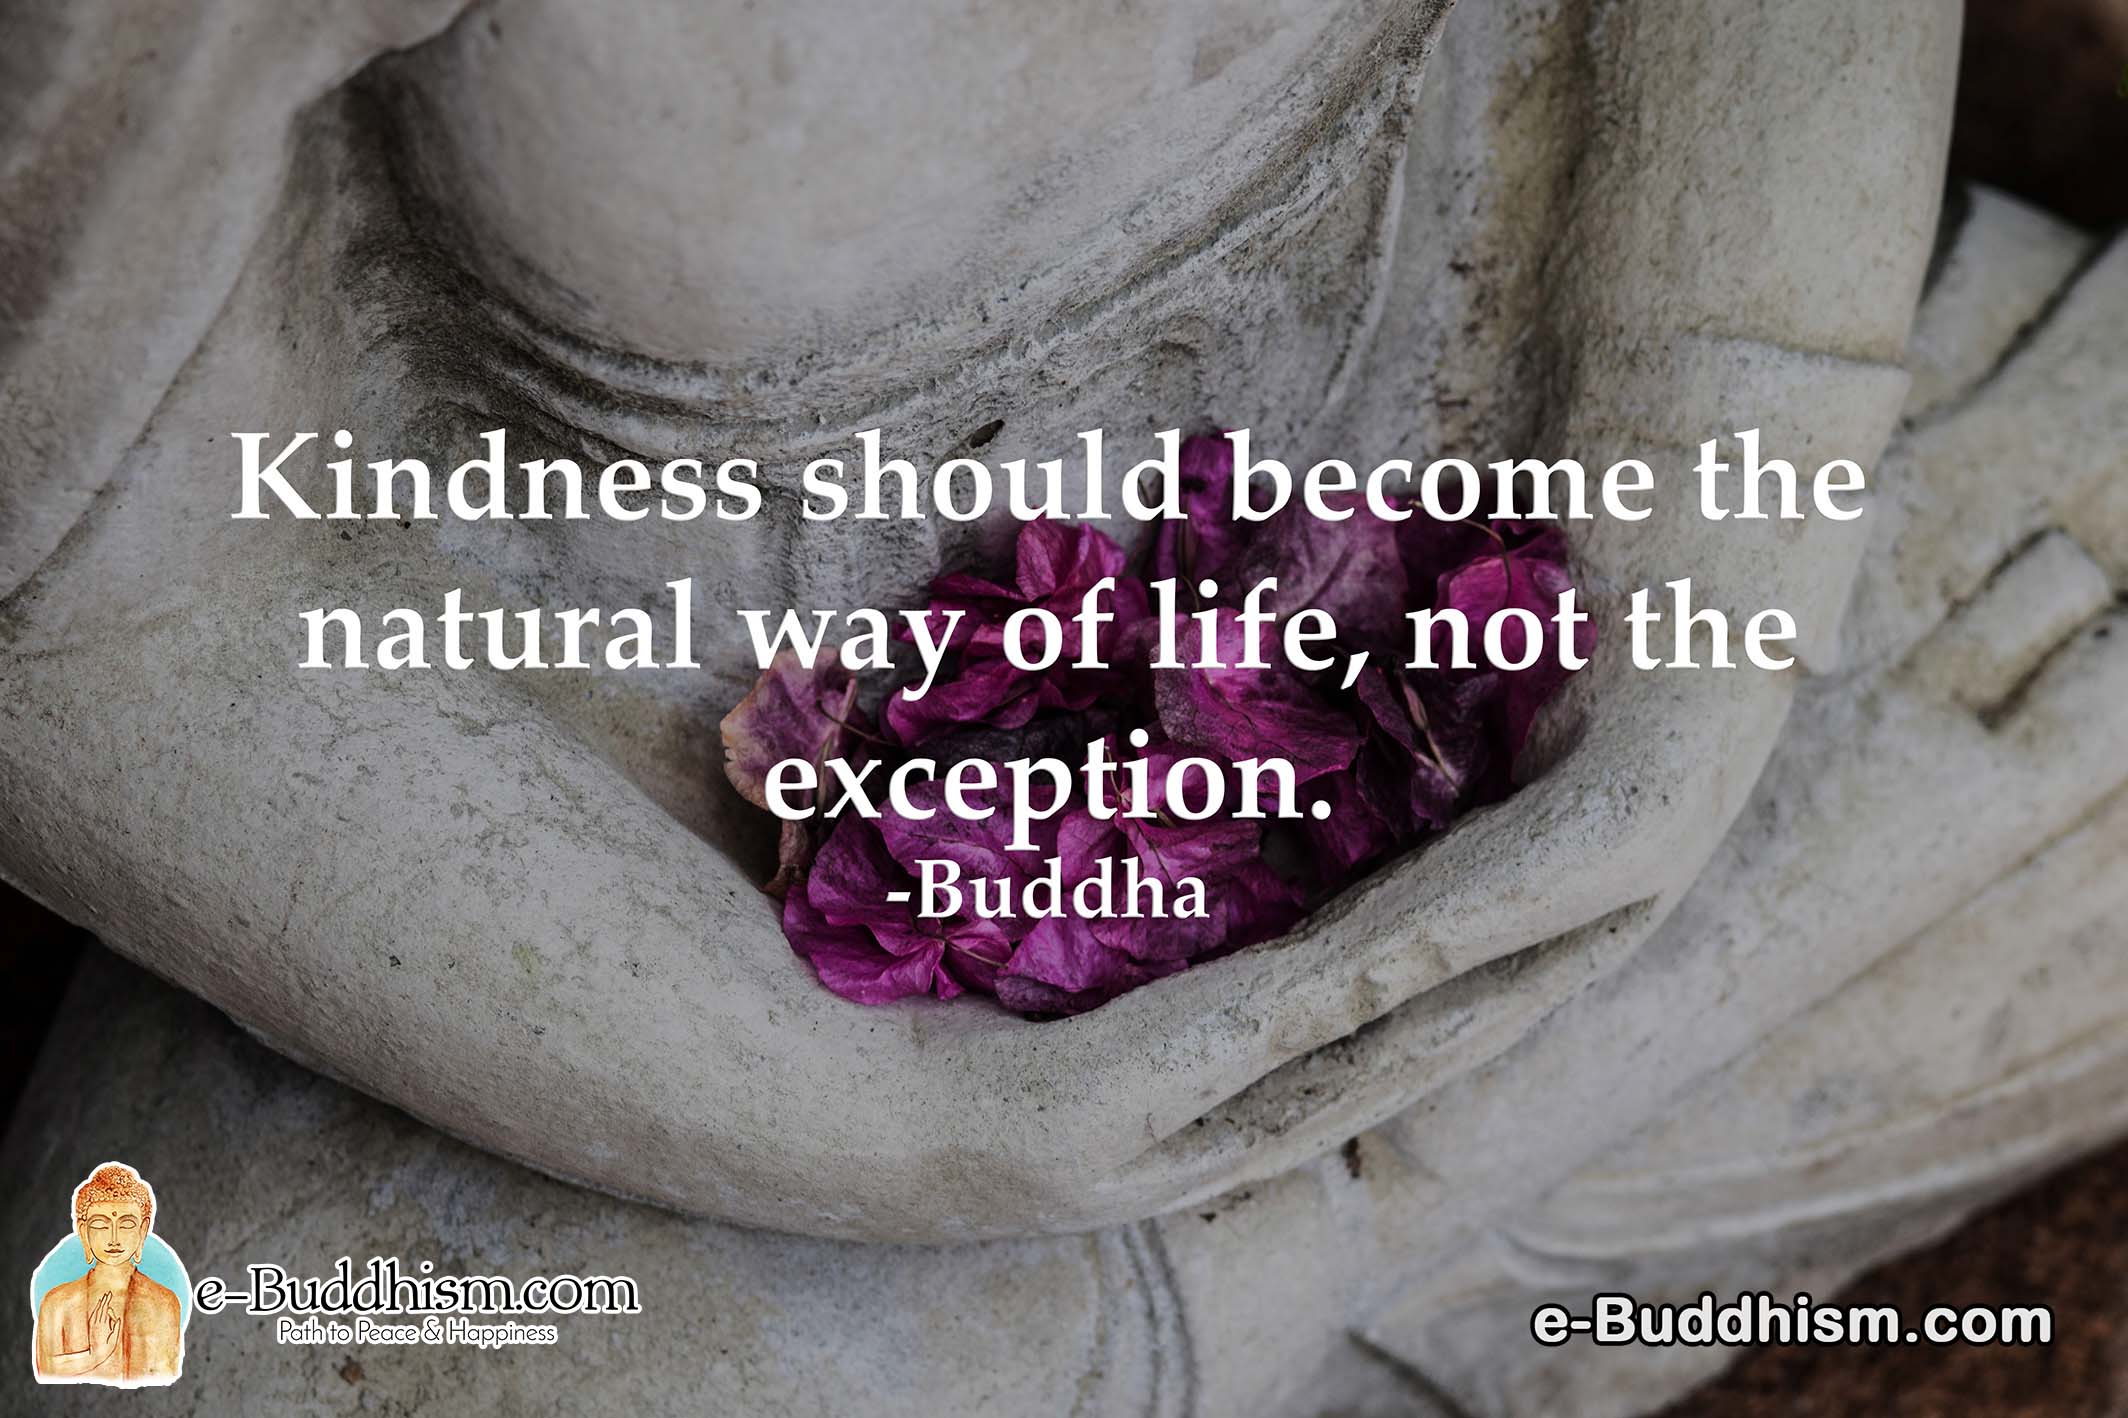 Kindness should become the natural way of life, not the exception. -Buddha